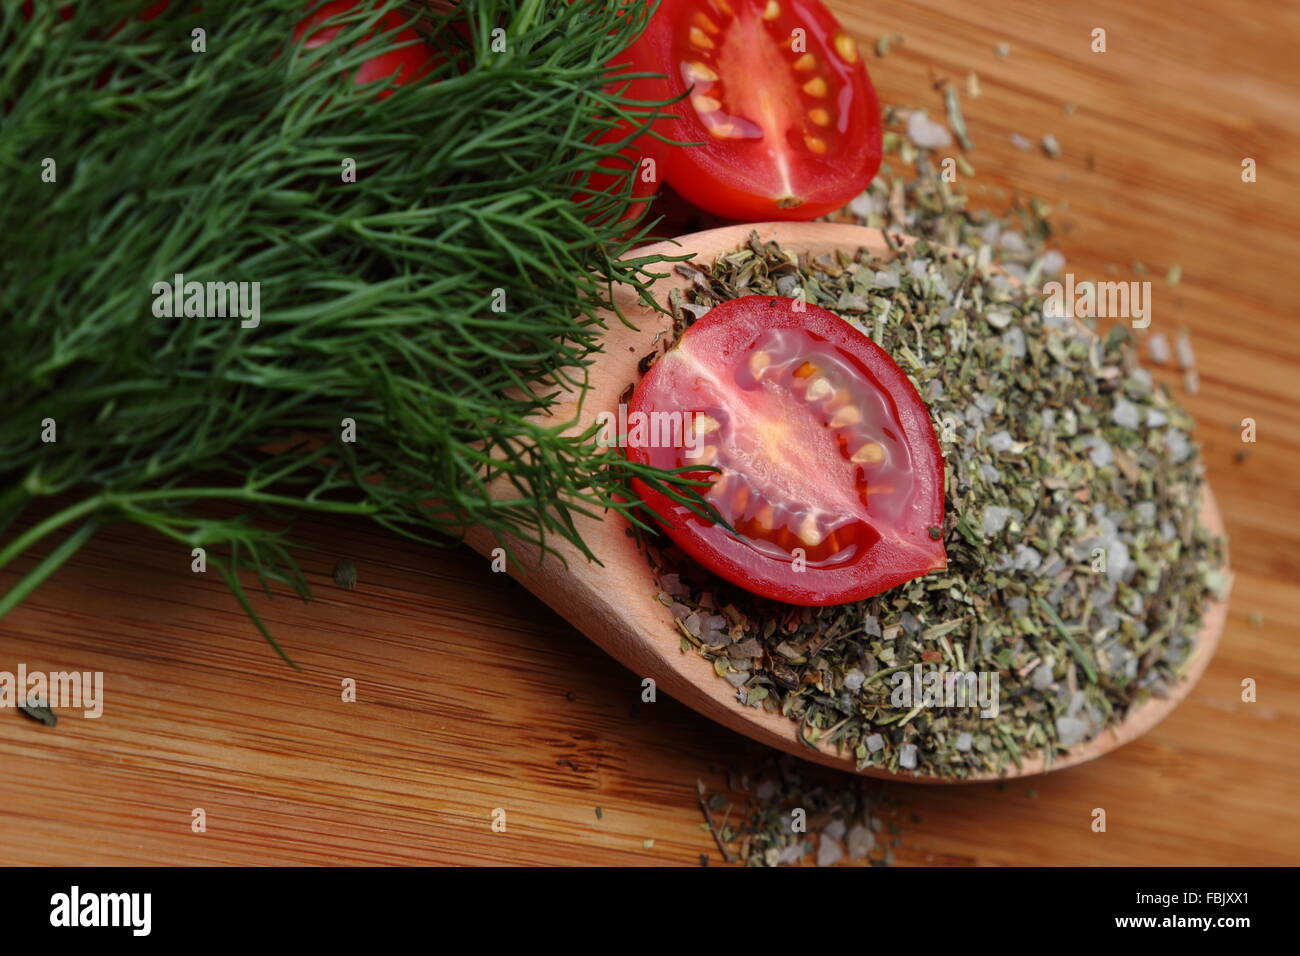 Tomatoes, dill and spices on a wooden spoon Stock Photo